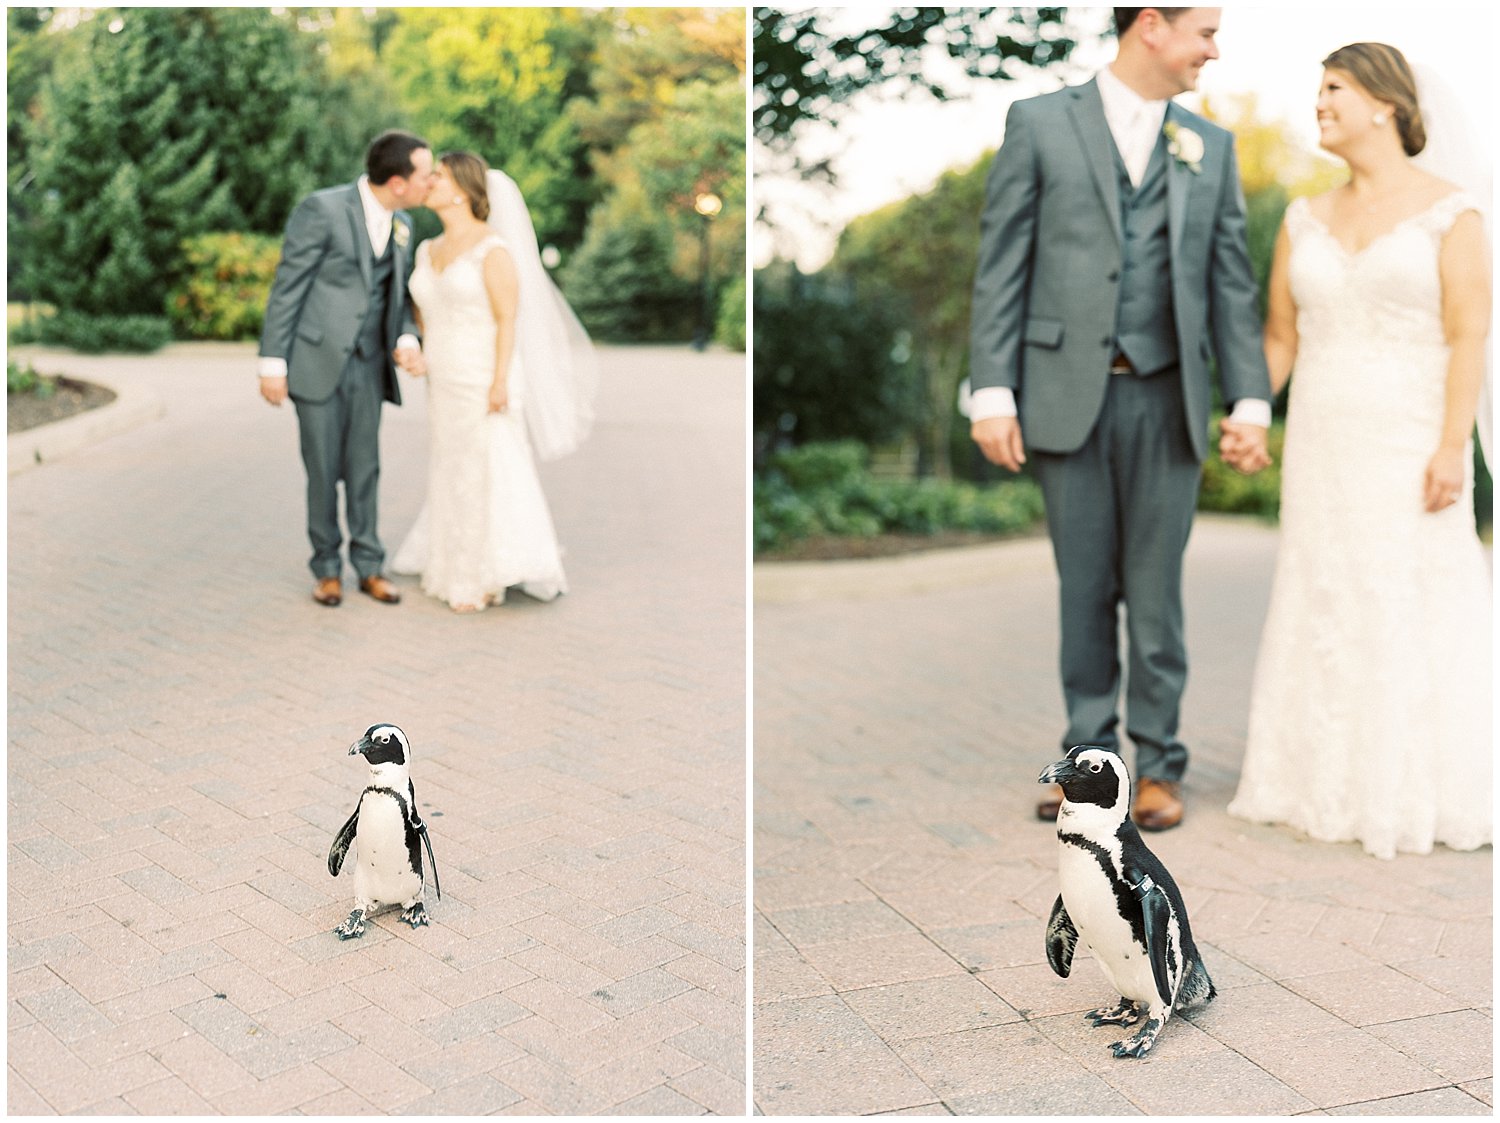 Bride and groom with penguin at Maryland Zoo